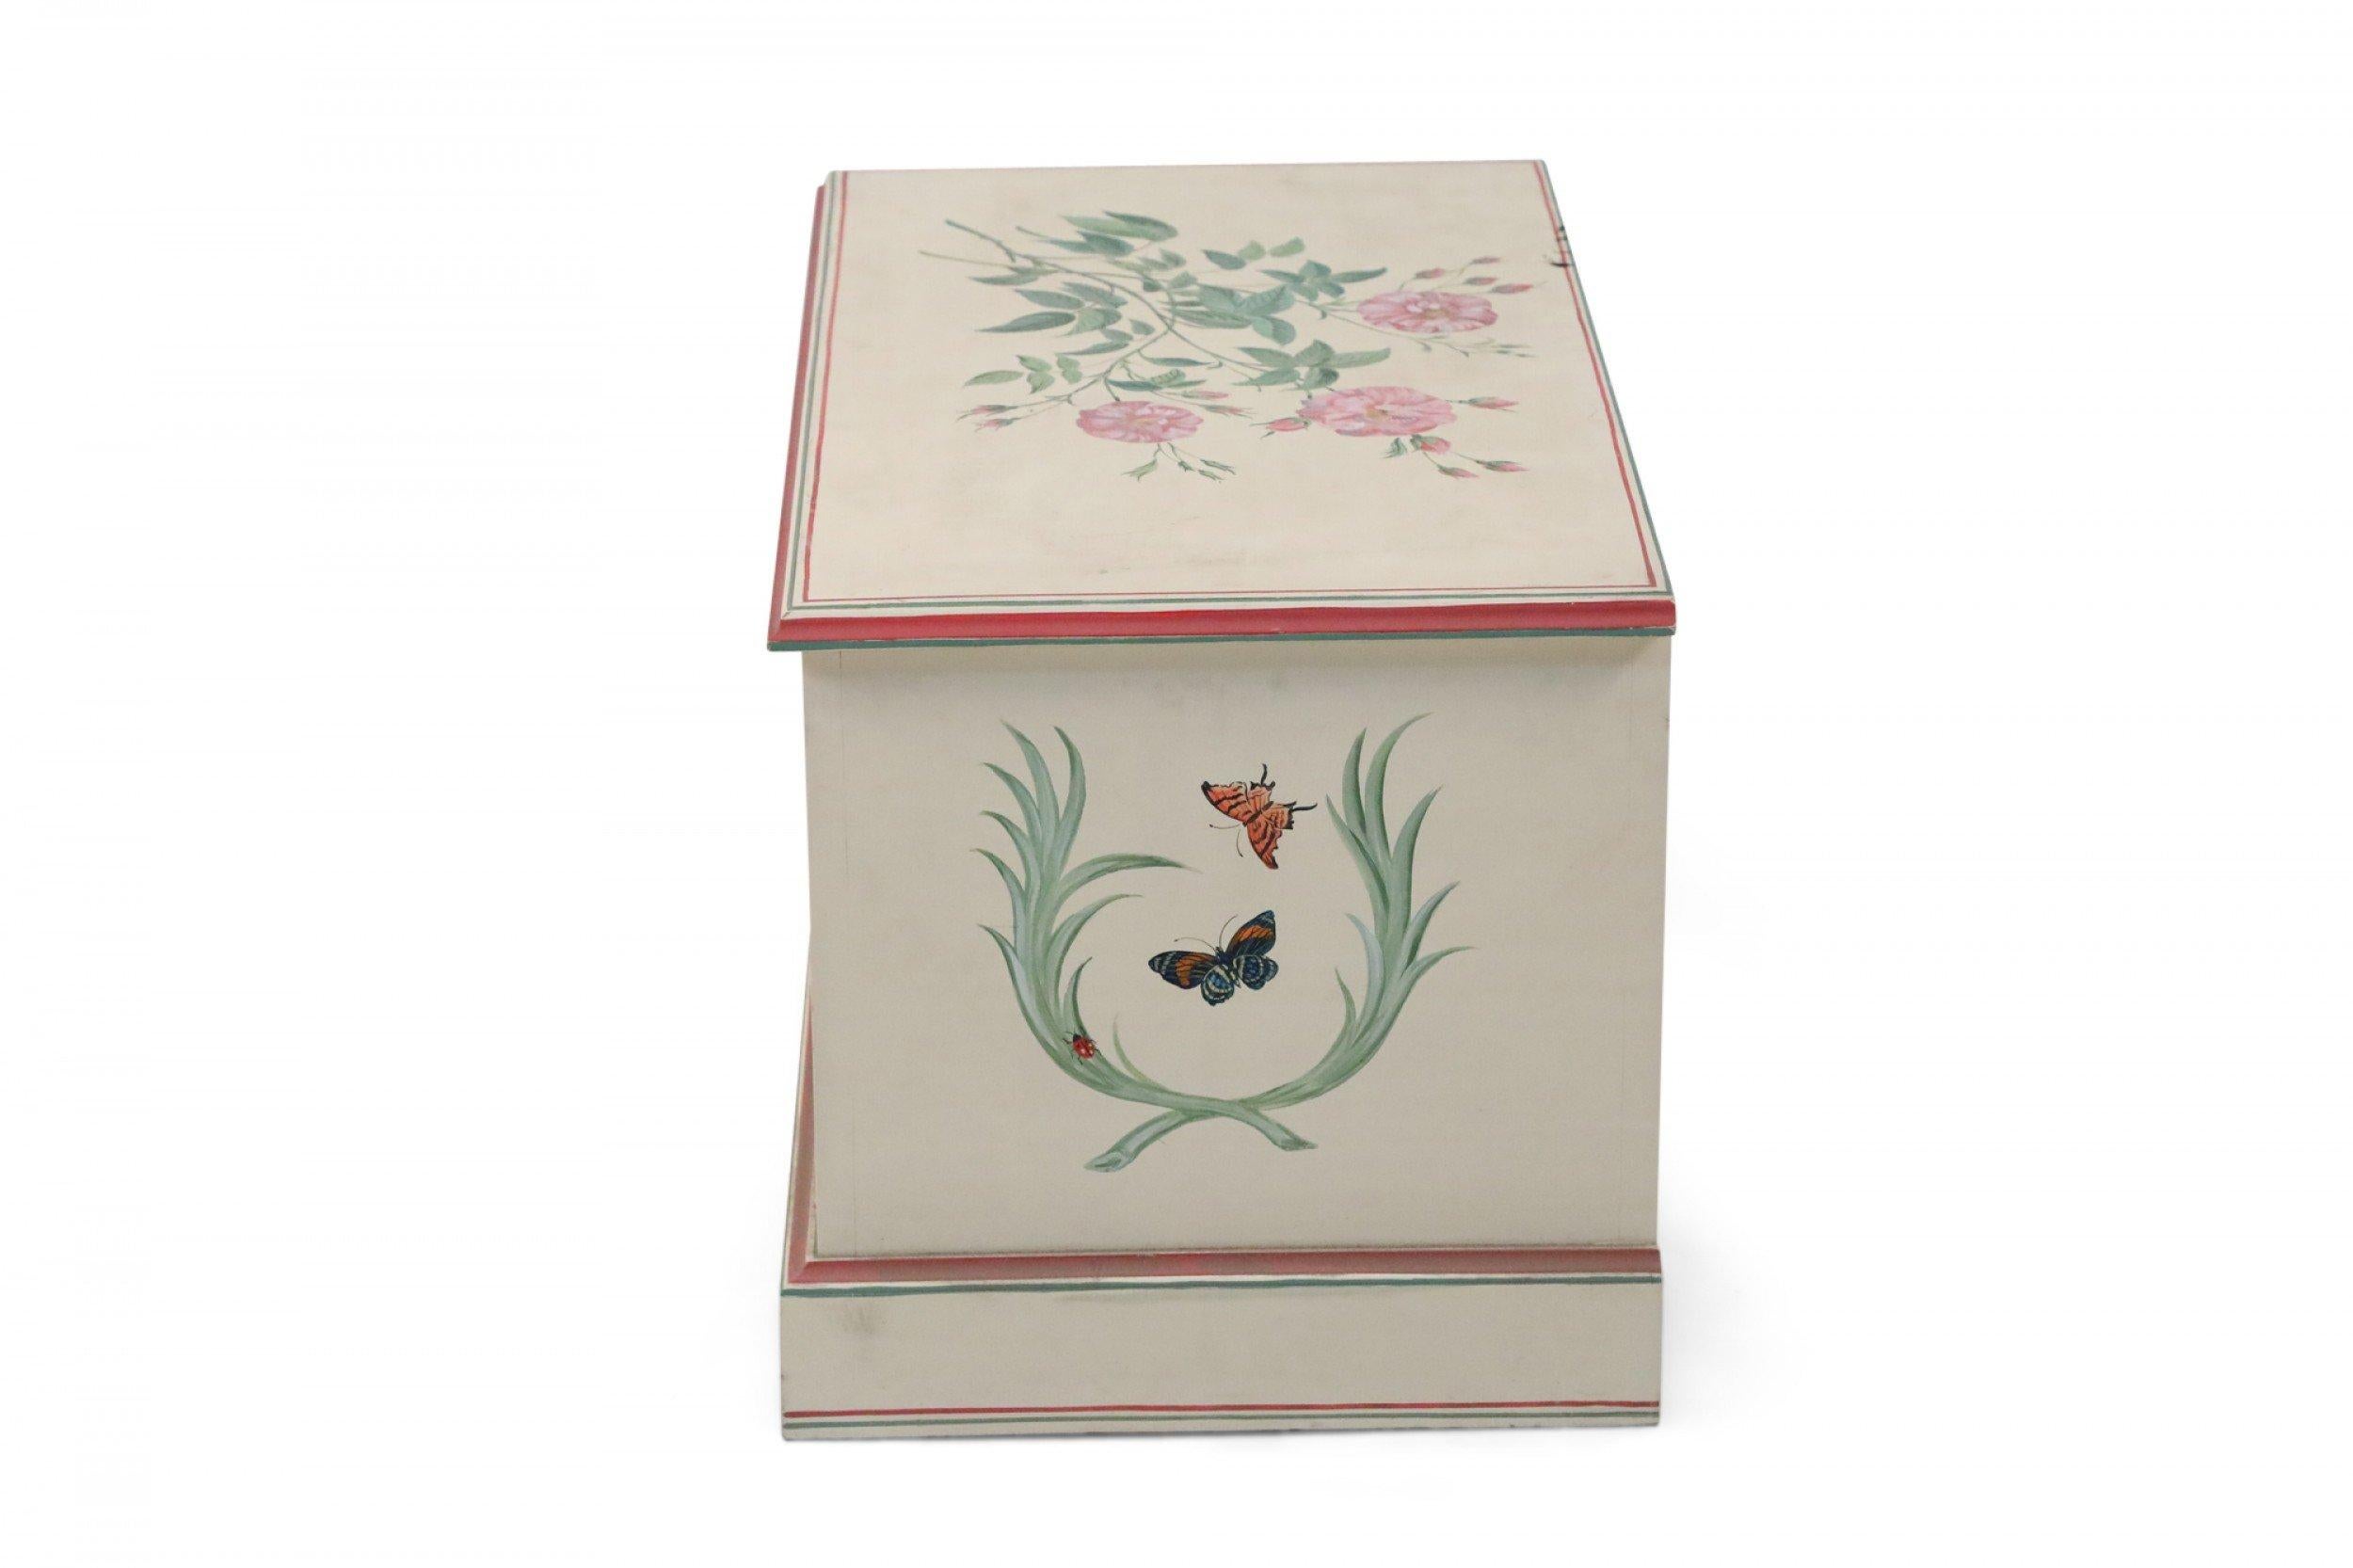 Contemporary beige painted wooden floor trunk painted with red and green trim, and decorations of florals, laurels, butterflies and ladybugs on the top, front and sides, along with the name 